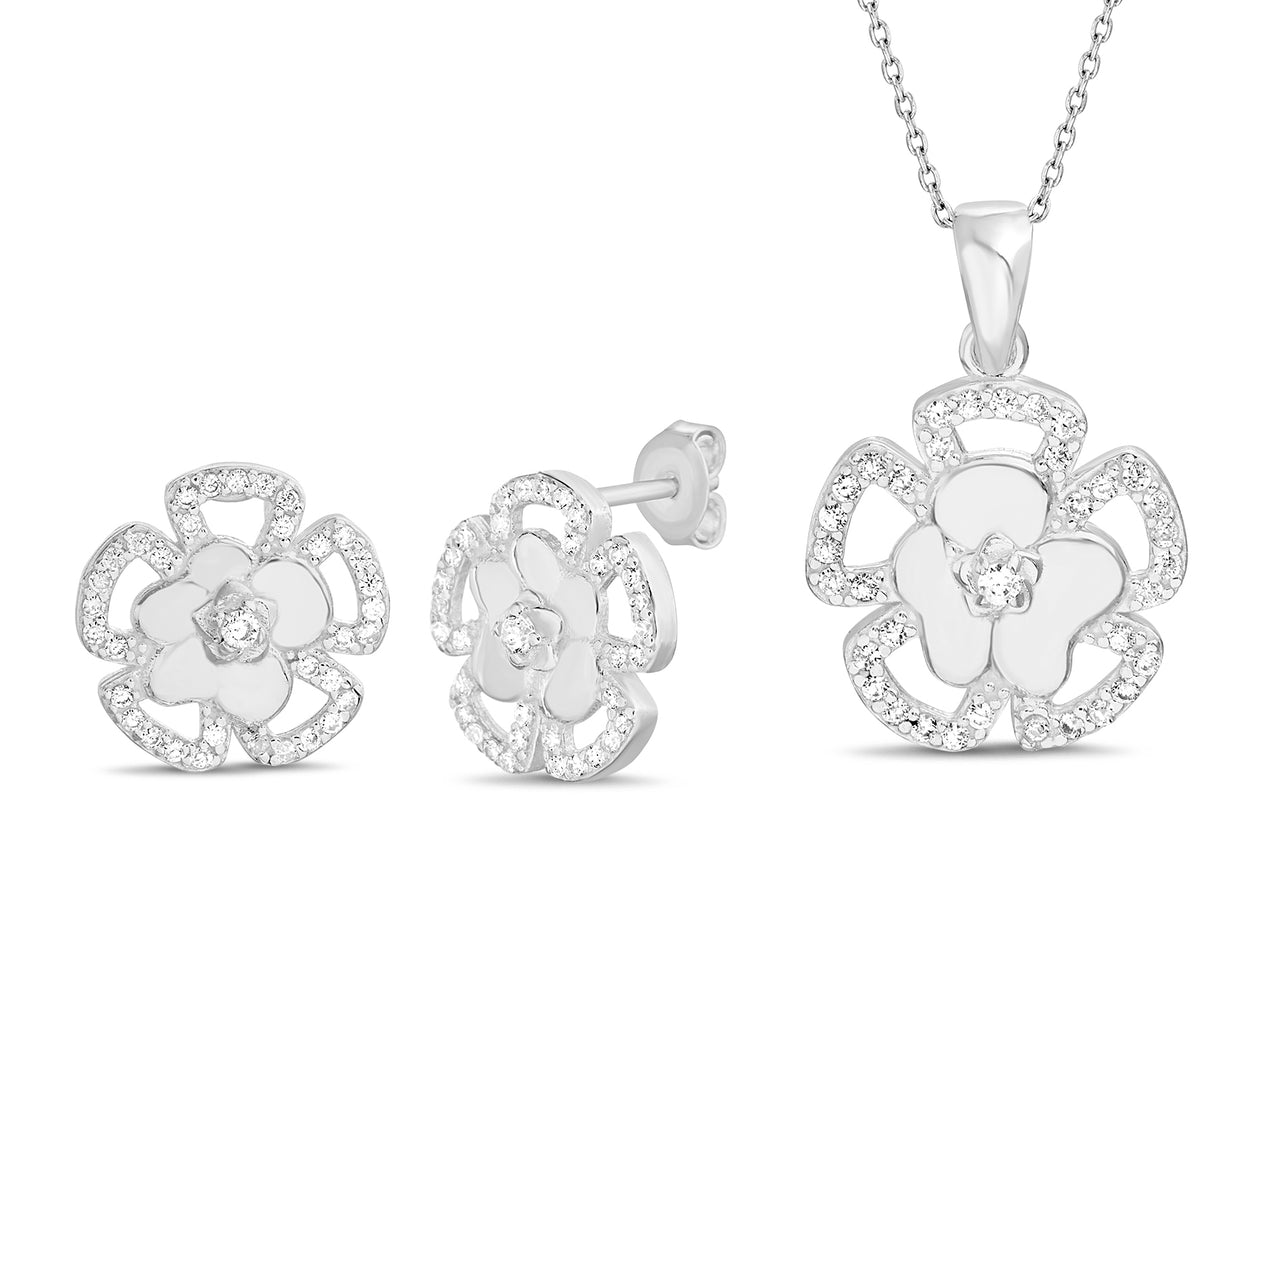 Lesa Michele Polished and Open Flower Pendant Necklace and Matching Stud Earring Set in Sterling Silver with Cubic Zirconia